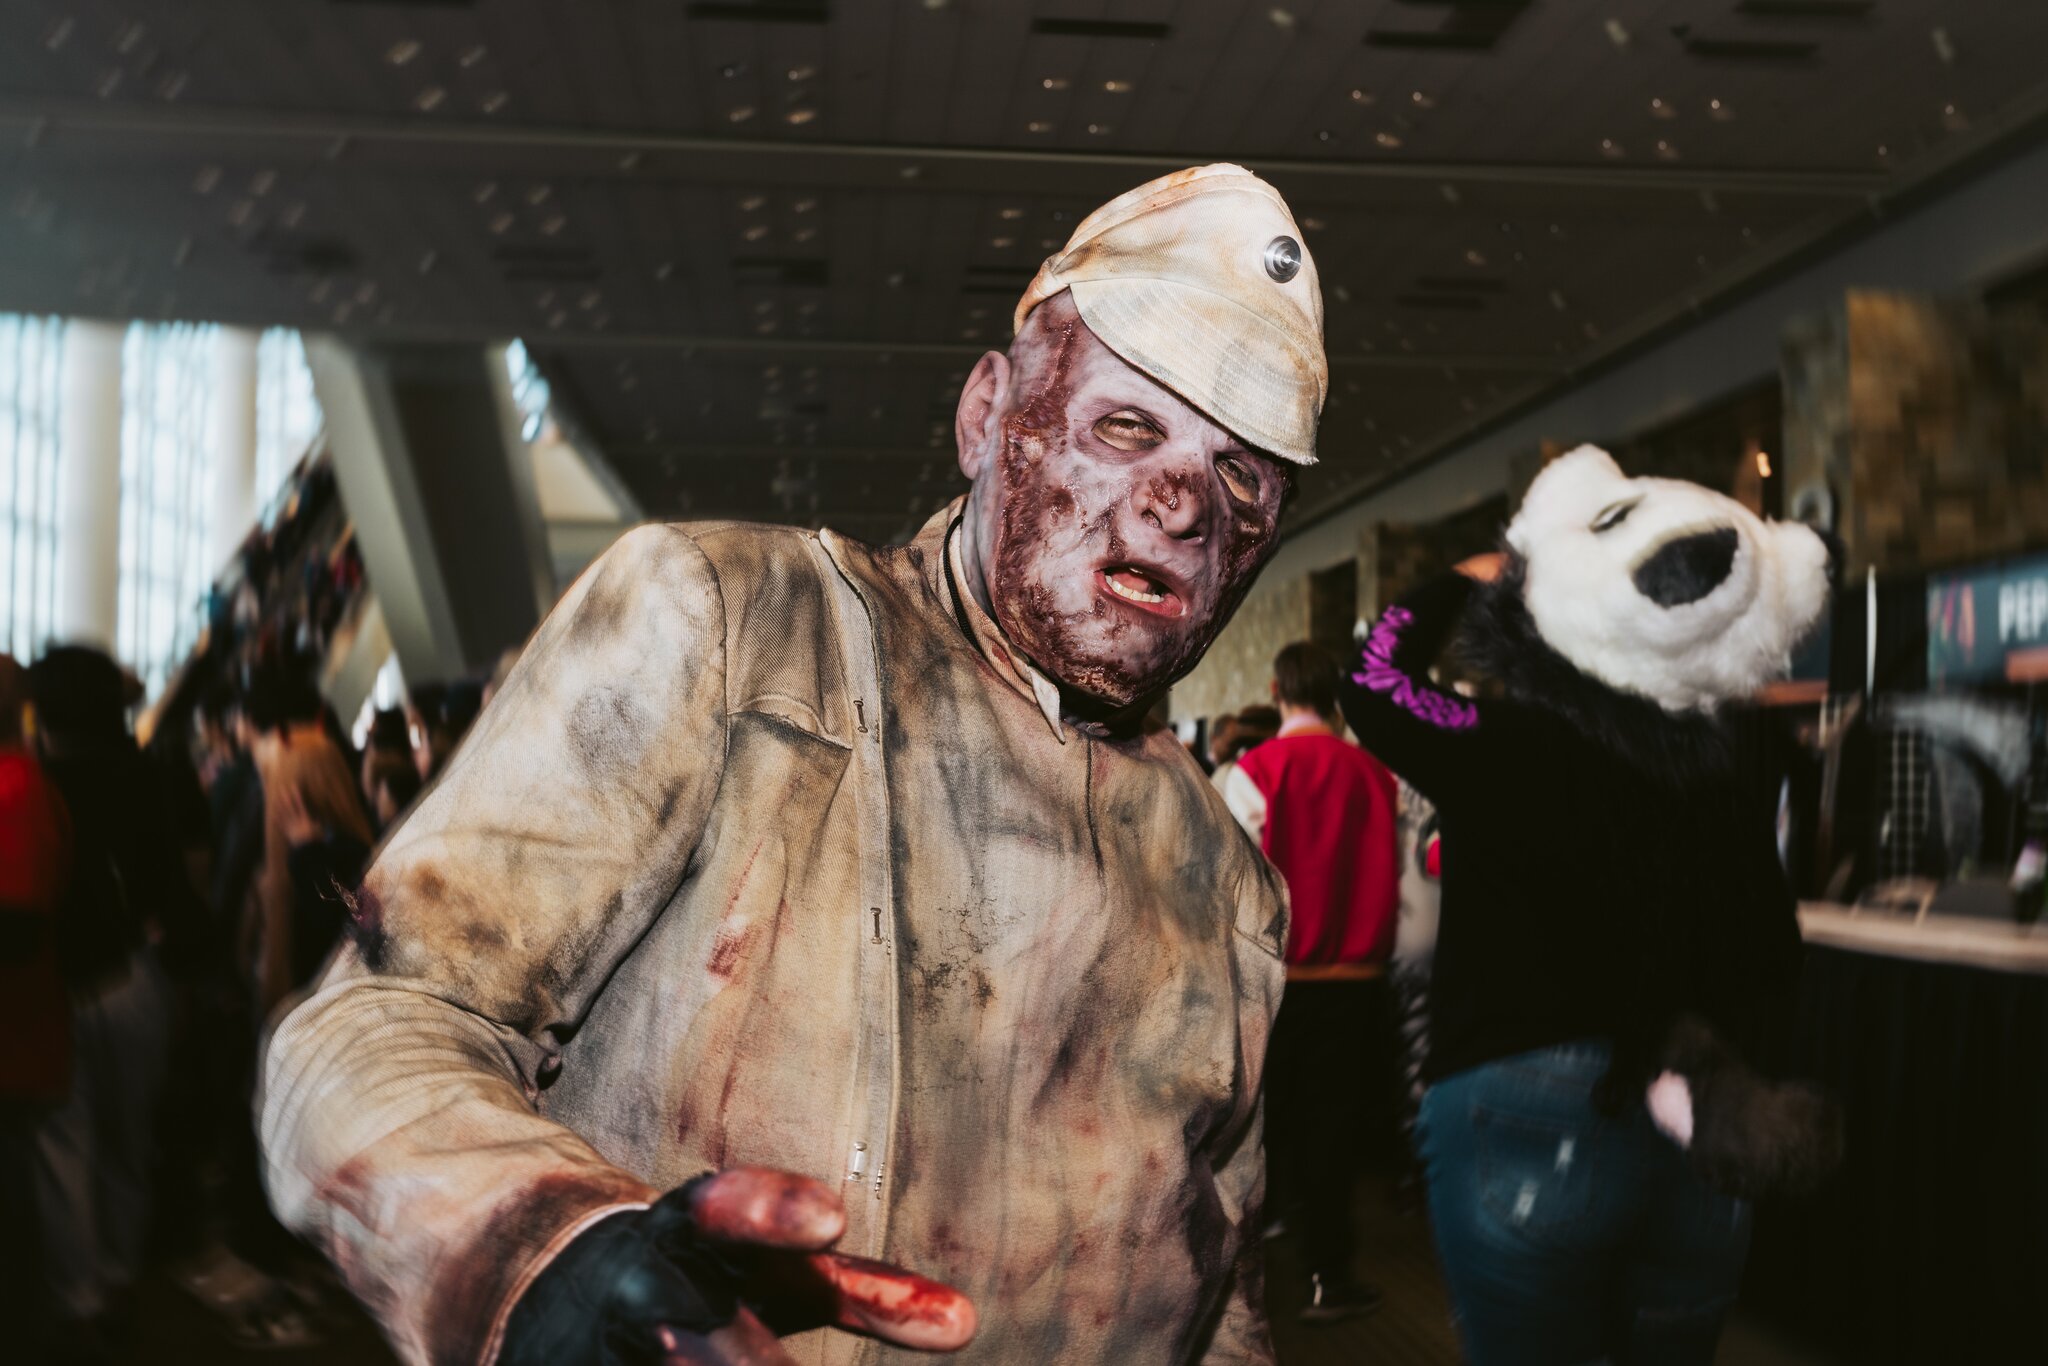 A man in a dirty costume resembles a zombie.